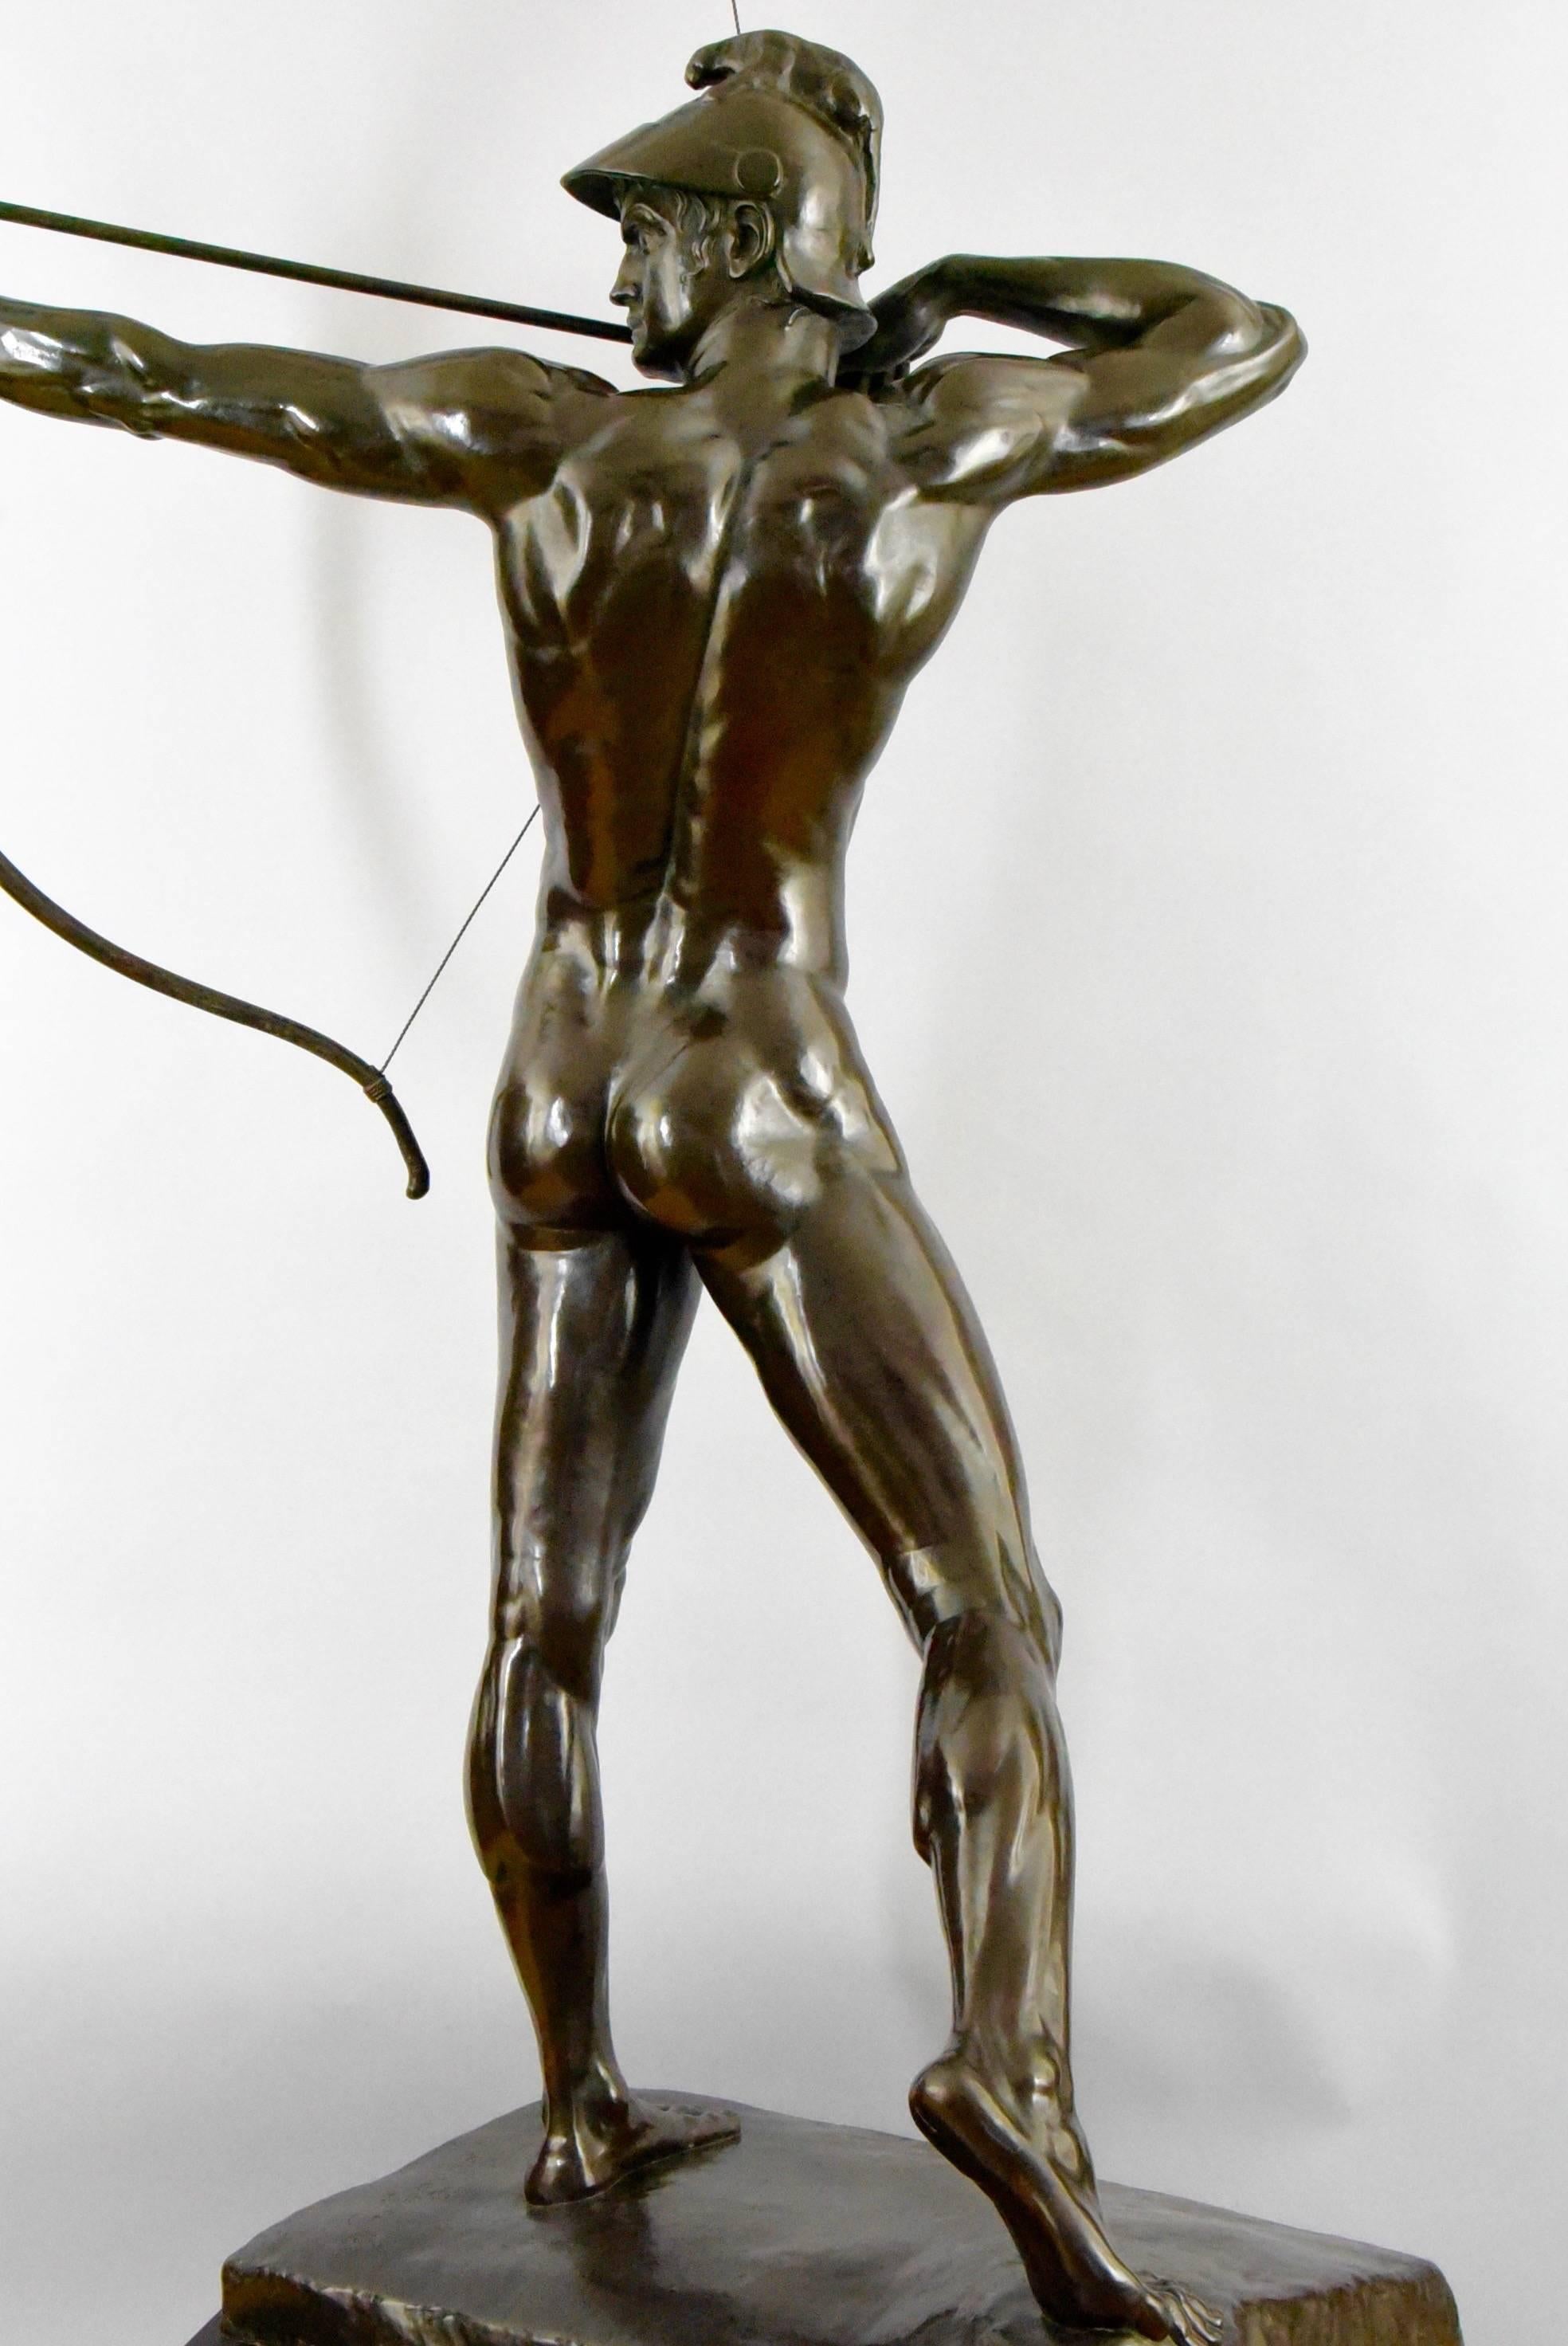 Patinated Life size Bronze Sculpture Male Nude Archer by Ernst Moritz Geyger H. 60 inch